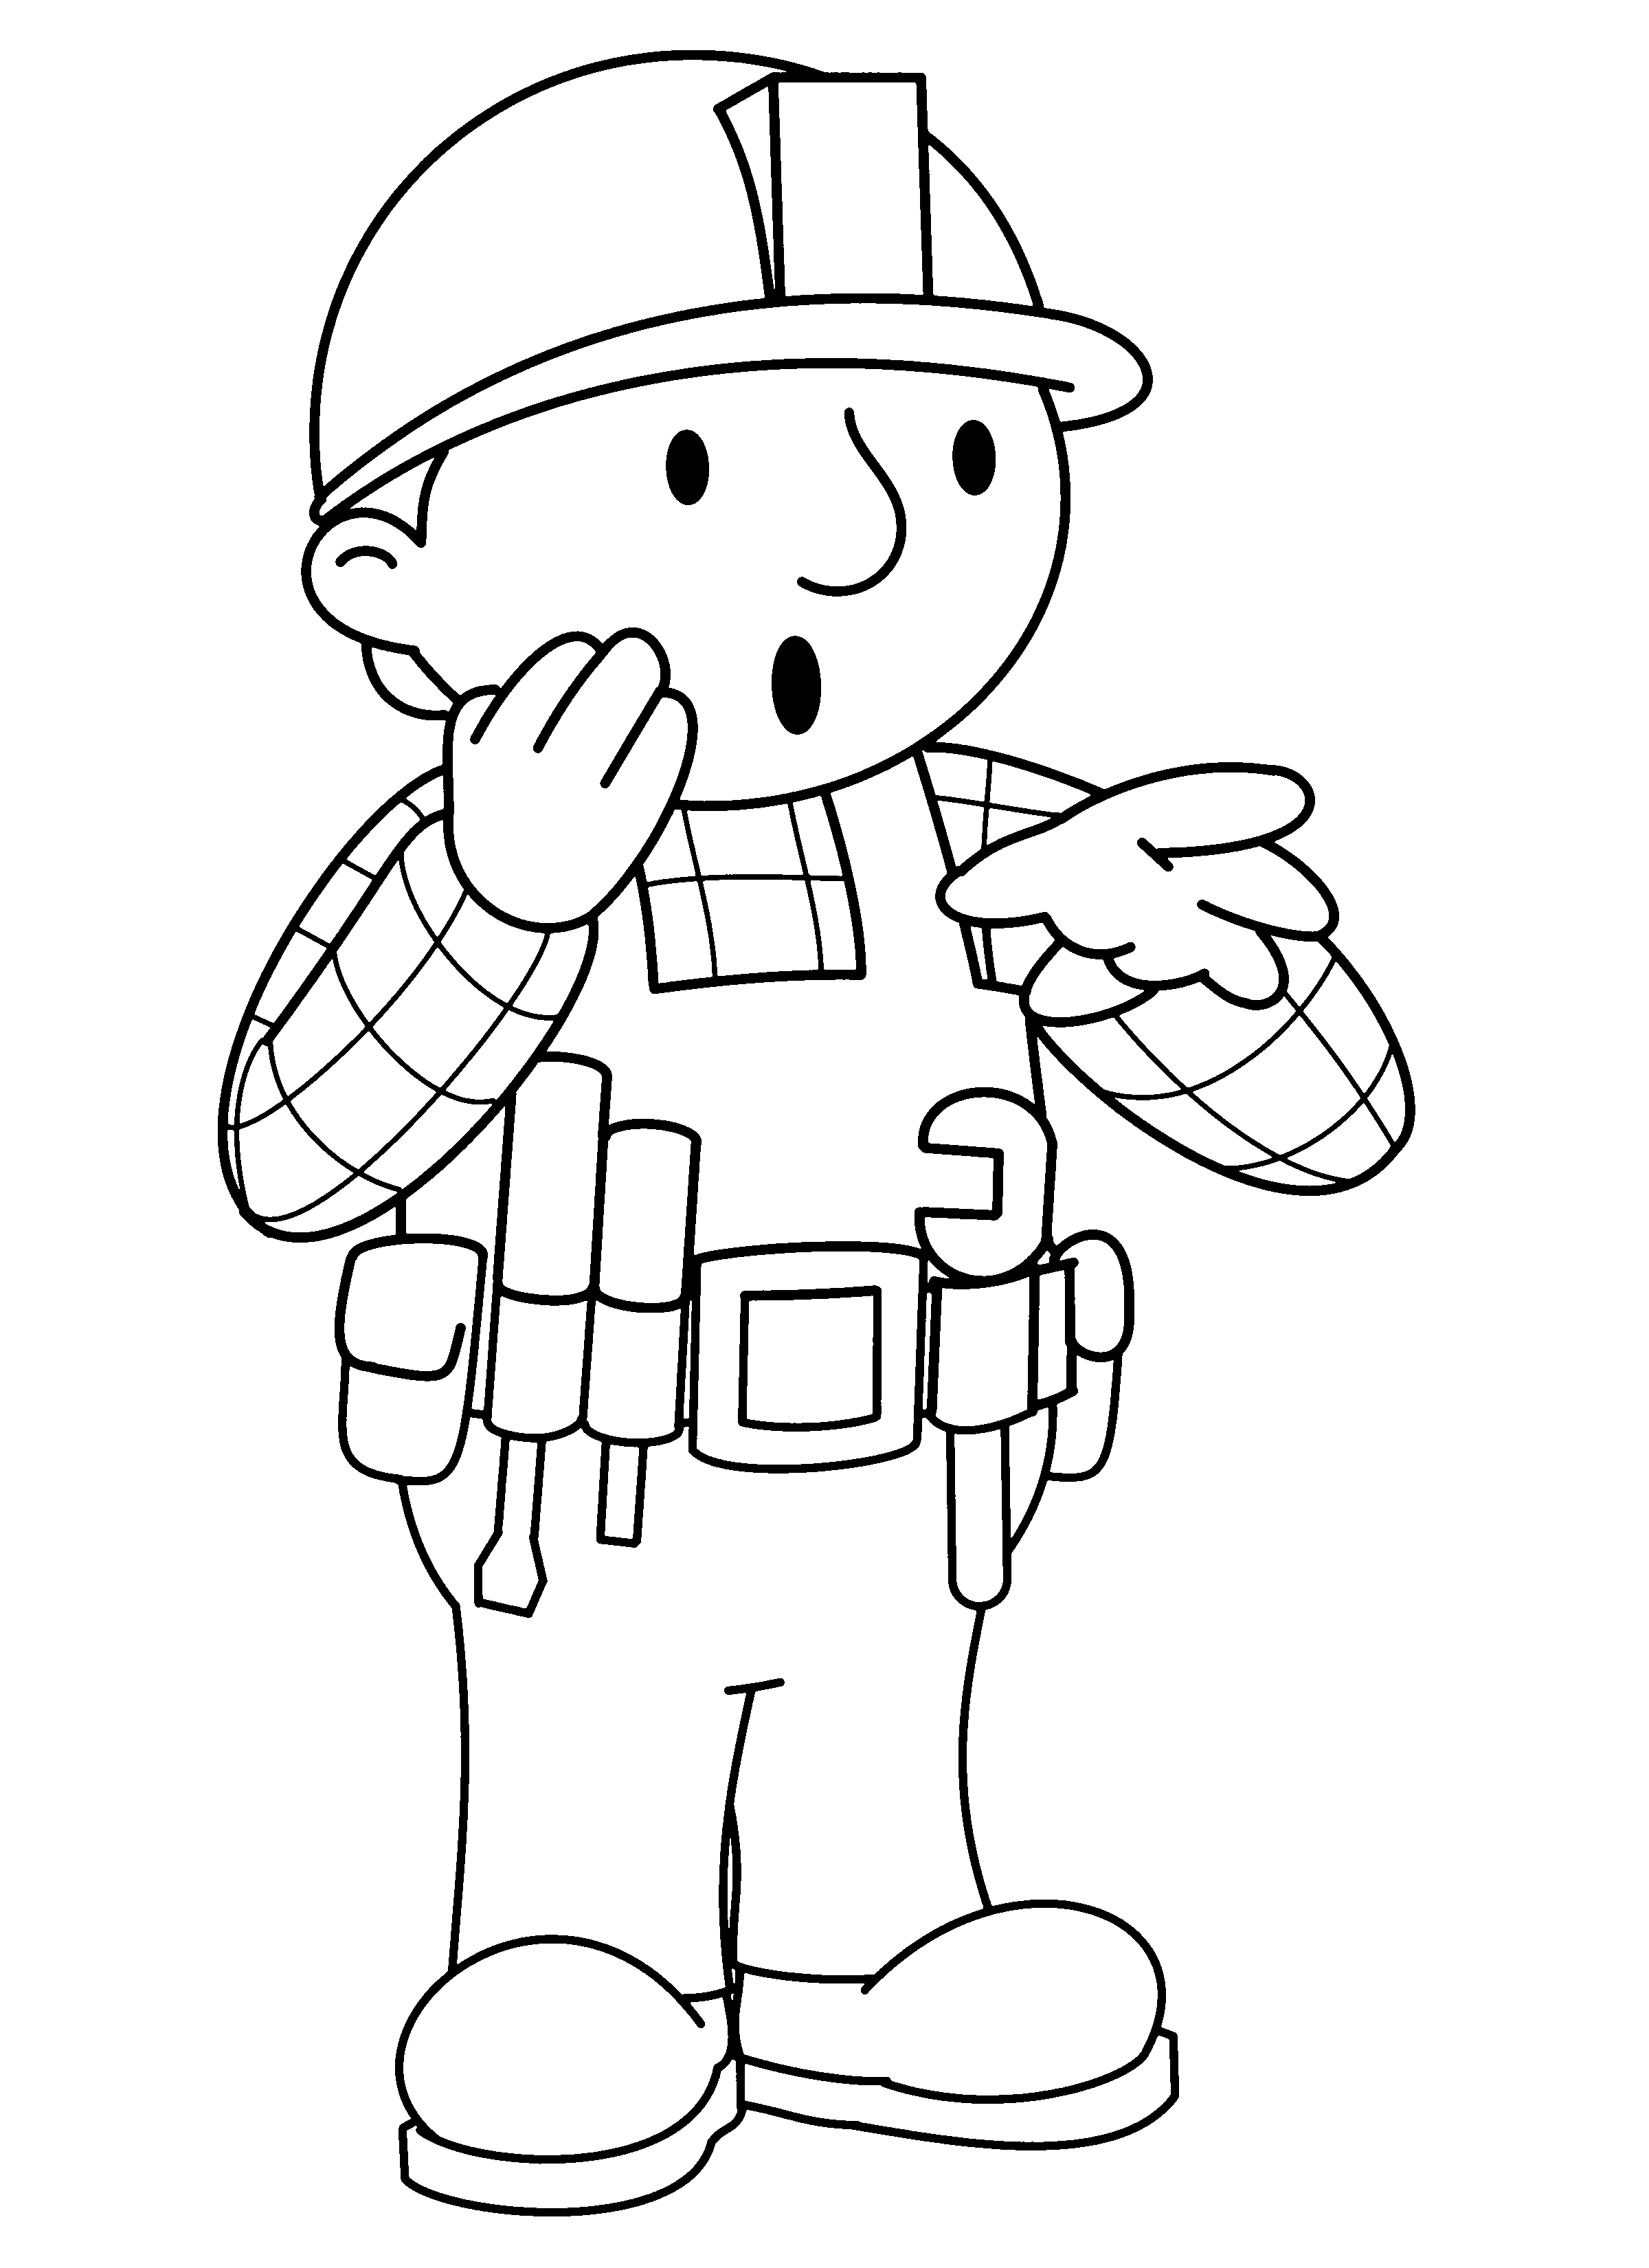 coloring-page-bob-the-builder-coloring-pages-67